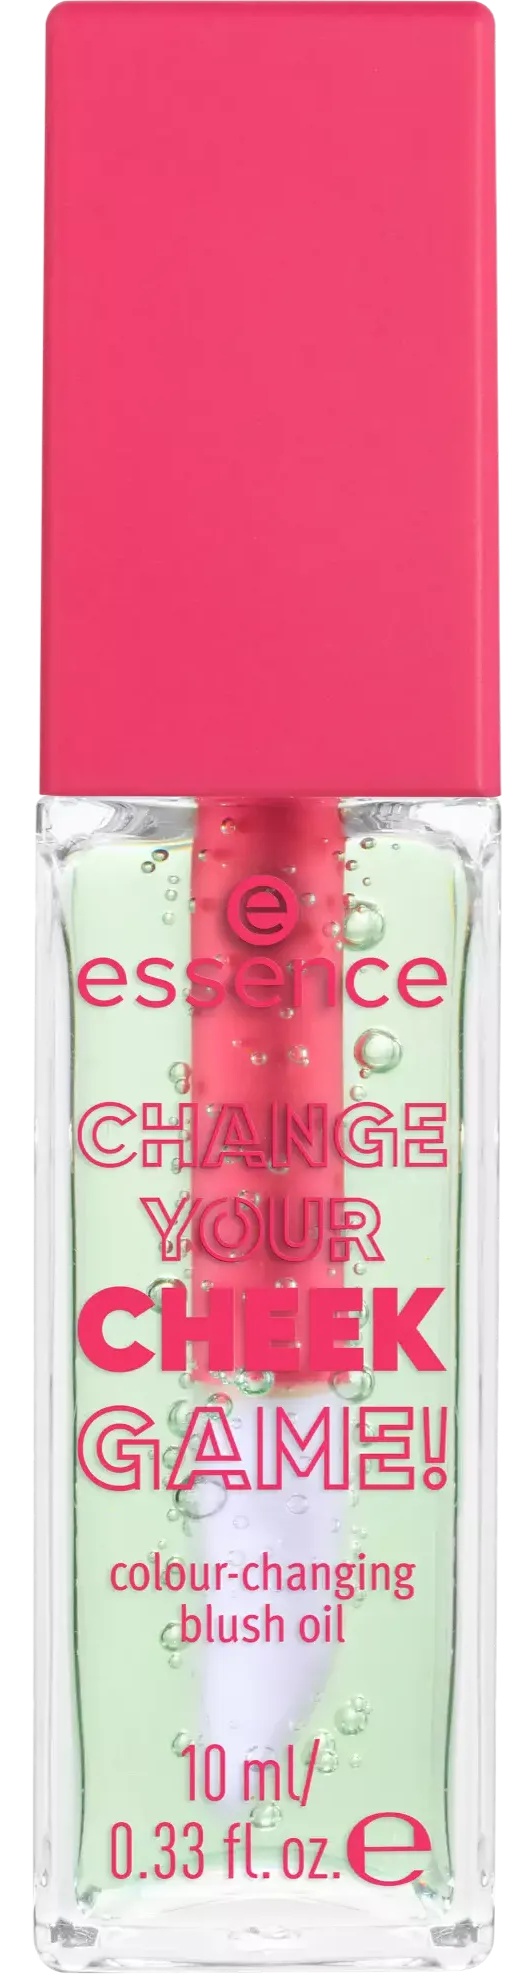 Essence Change Your Cheek Game! Colour-Changing Blush Oil